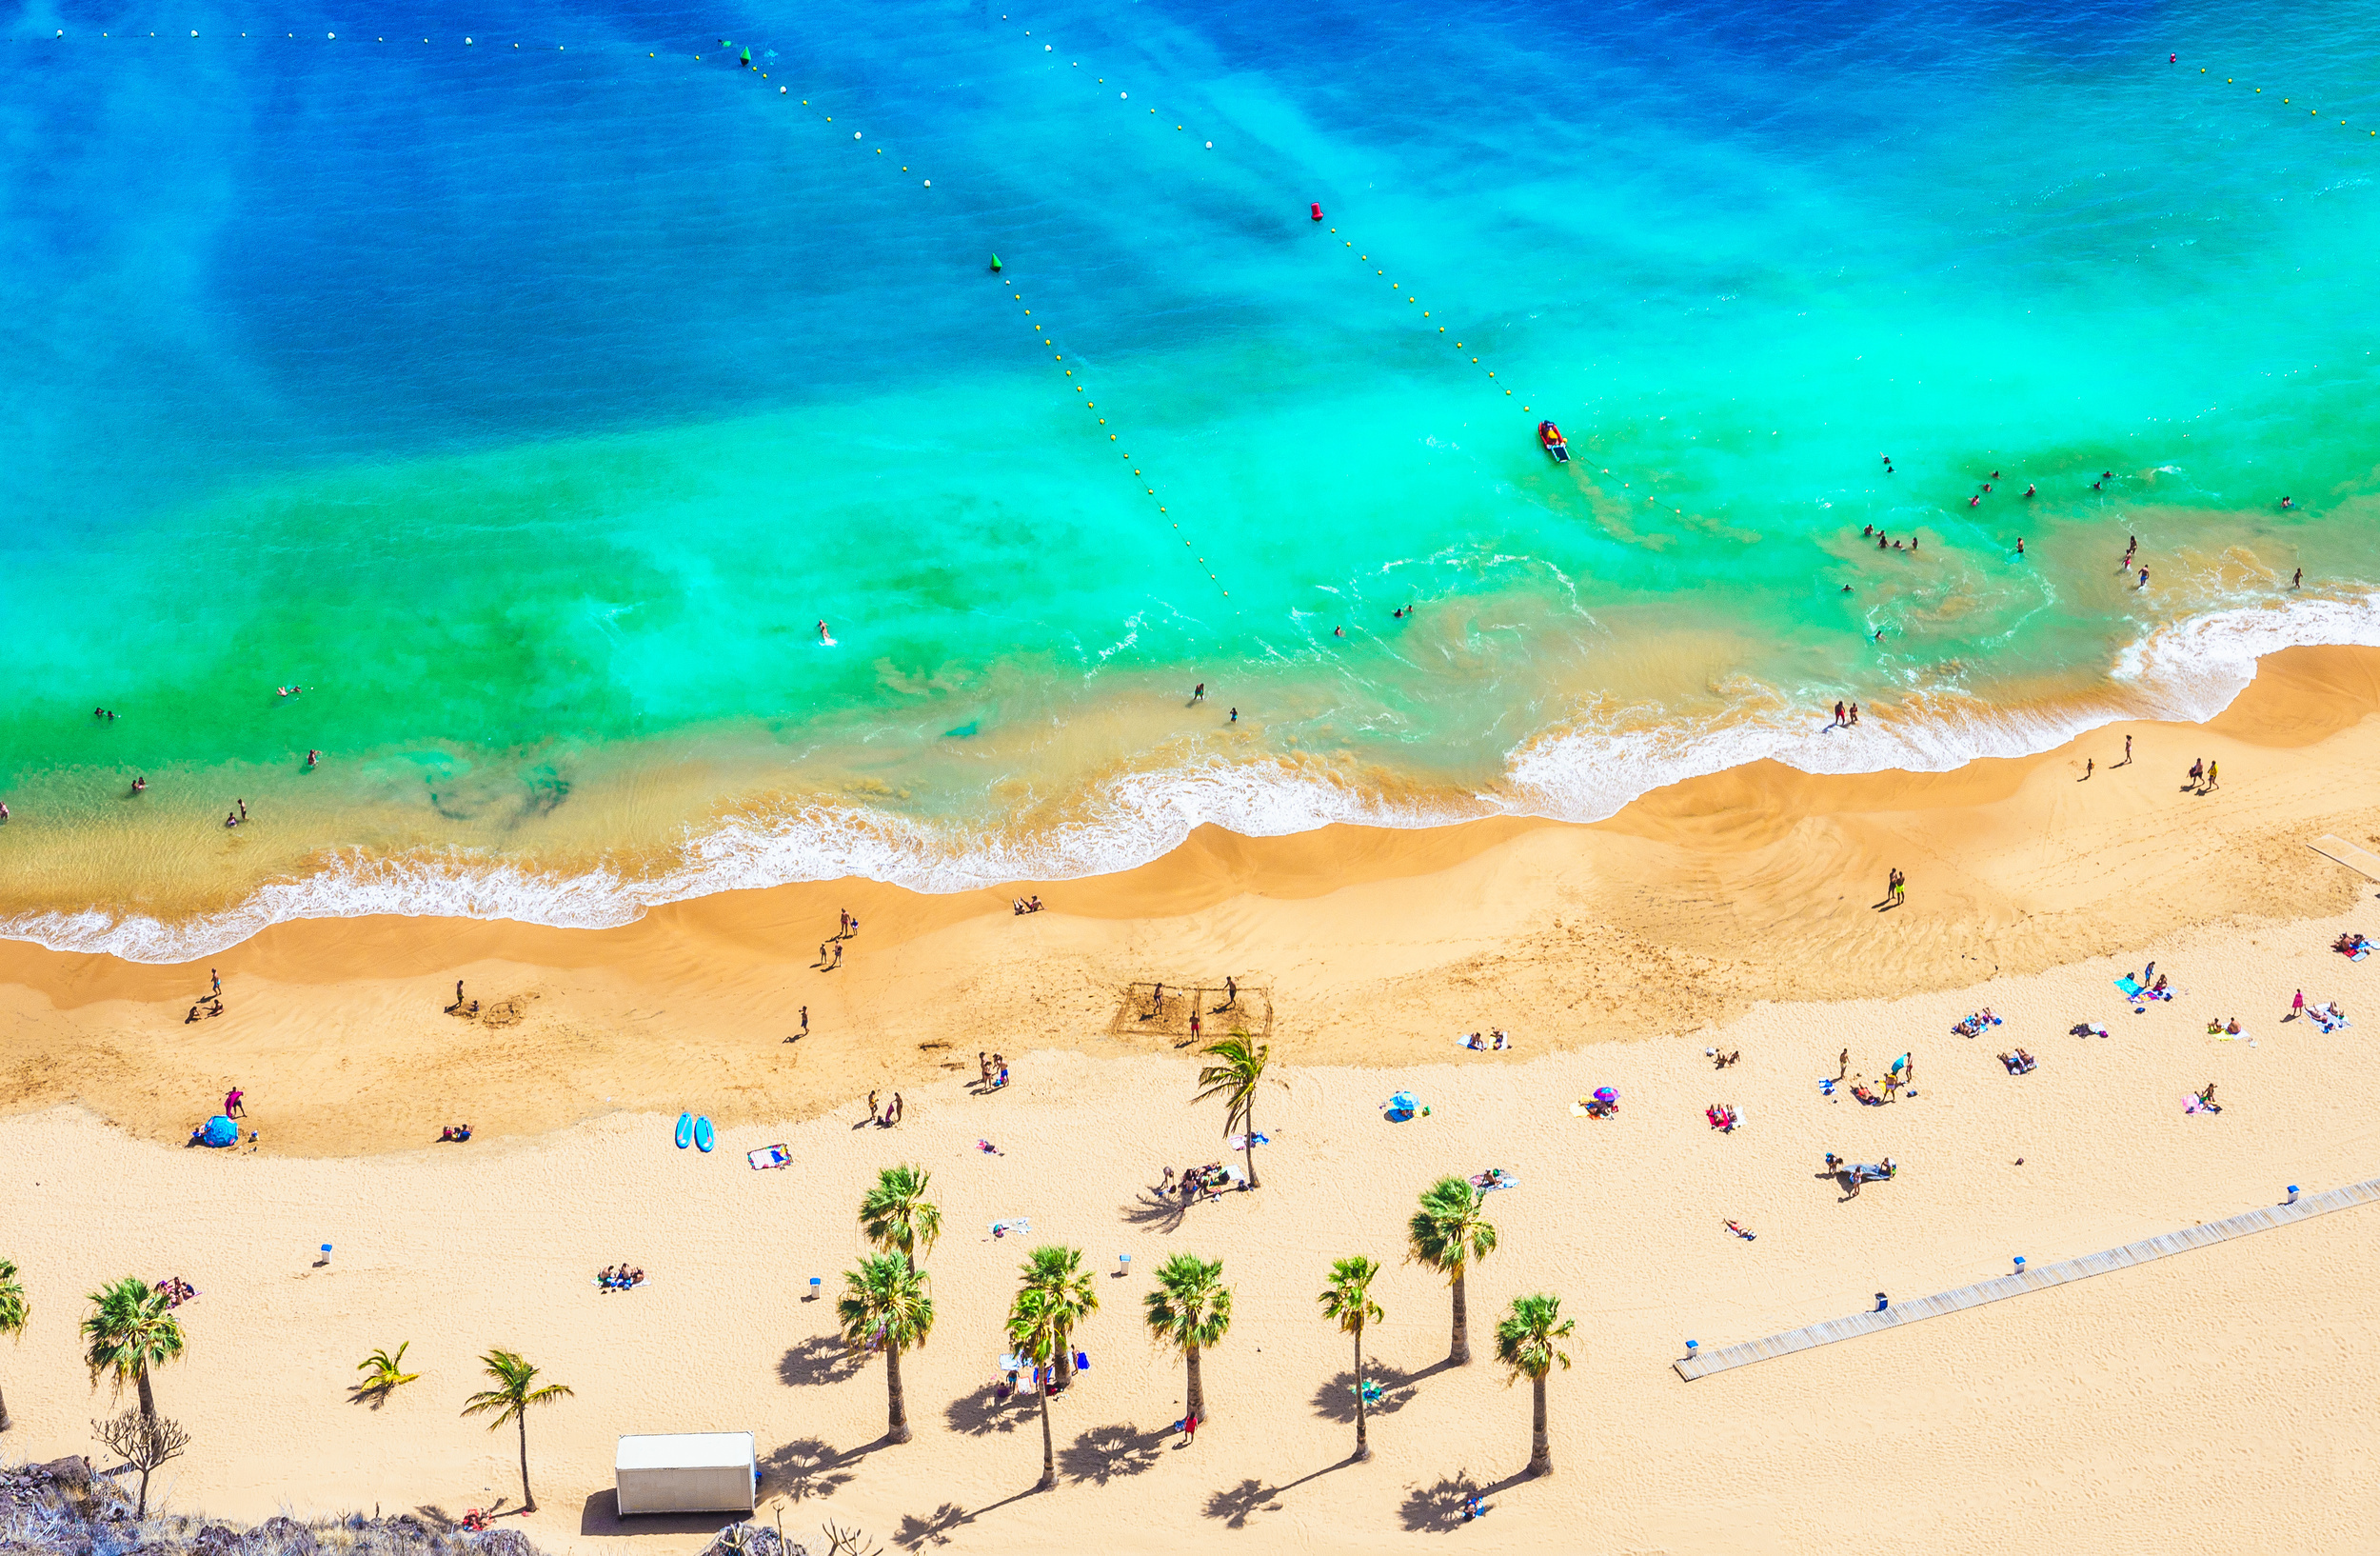 <p>The Canaries have become a favorite all around Europe as a sunshine getaway as the islands are warm year-round. This is rare, even in a lot of the Mediterranean. Thus, there are now direct flights from most major European hubs where you can enjoy summer weather no matter the month.</p><p>You may also like: <a href='https://www.yardbarker.com/lifestyle/articles/15_weird_wonderful_roadside_attractions_in_the_united_states_120123/s1__39002321'>15 weird & wonderful roadside attractions in the United States</a></p>